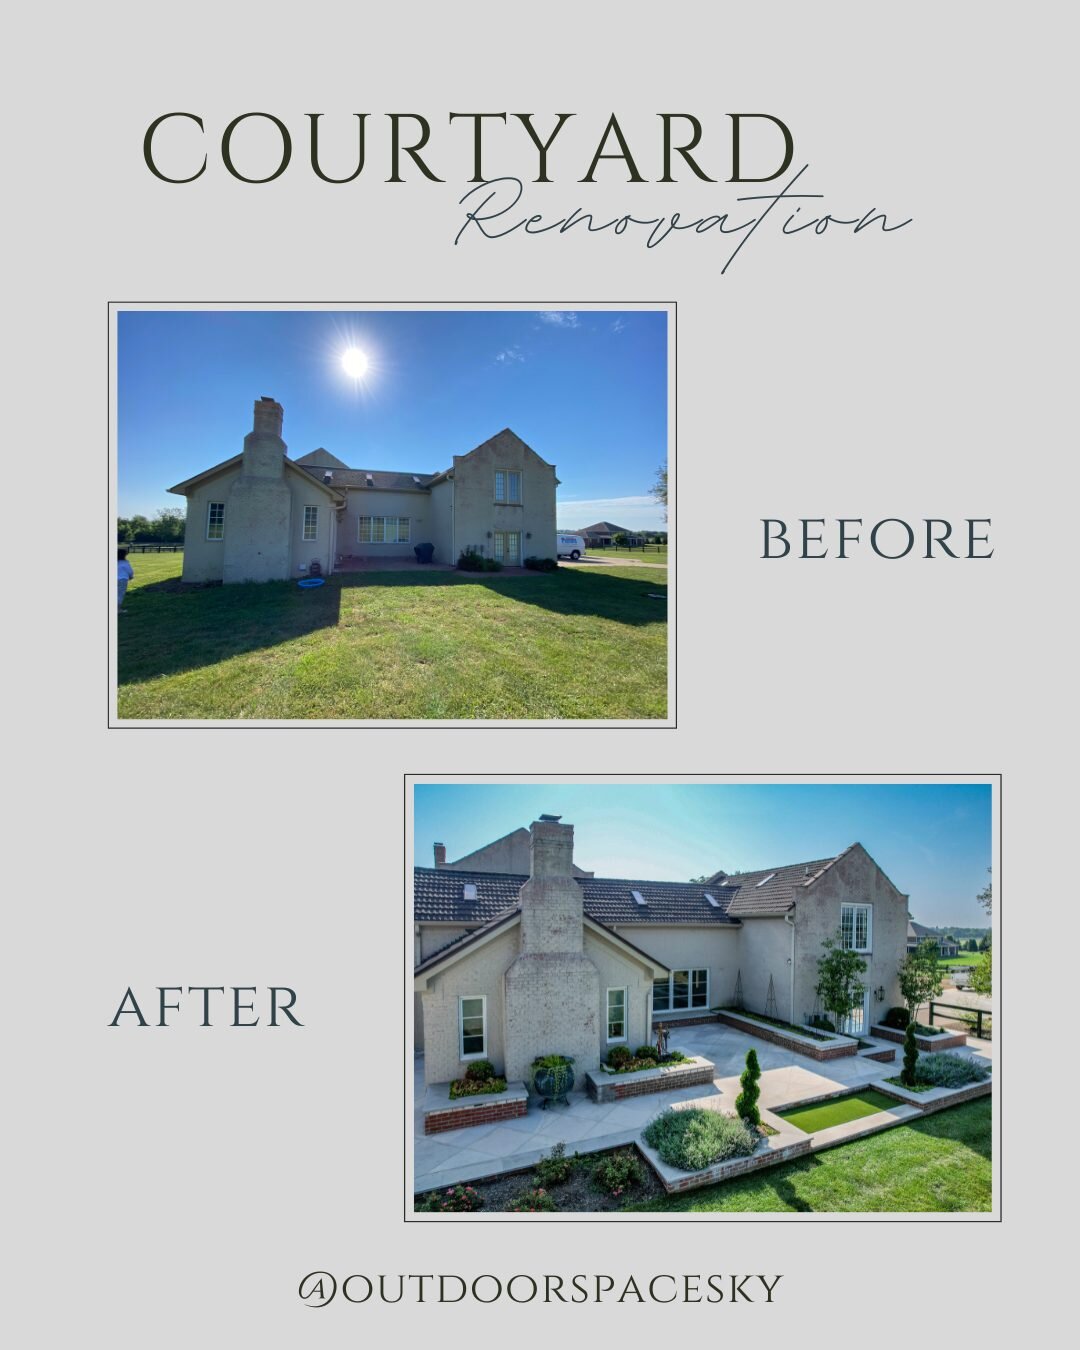 Transformation Tuesday - Check out our other before &amp; after projects on the gallery page @outdoorspacesky.com
#courtyard #patiorenovation #backyardmakeover